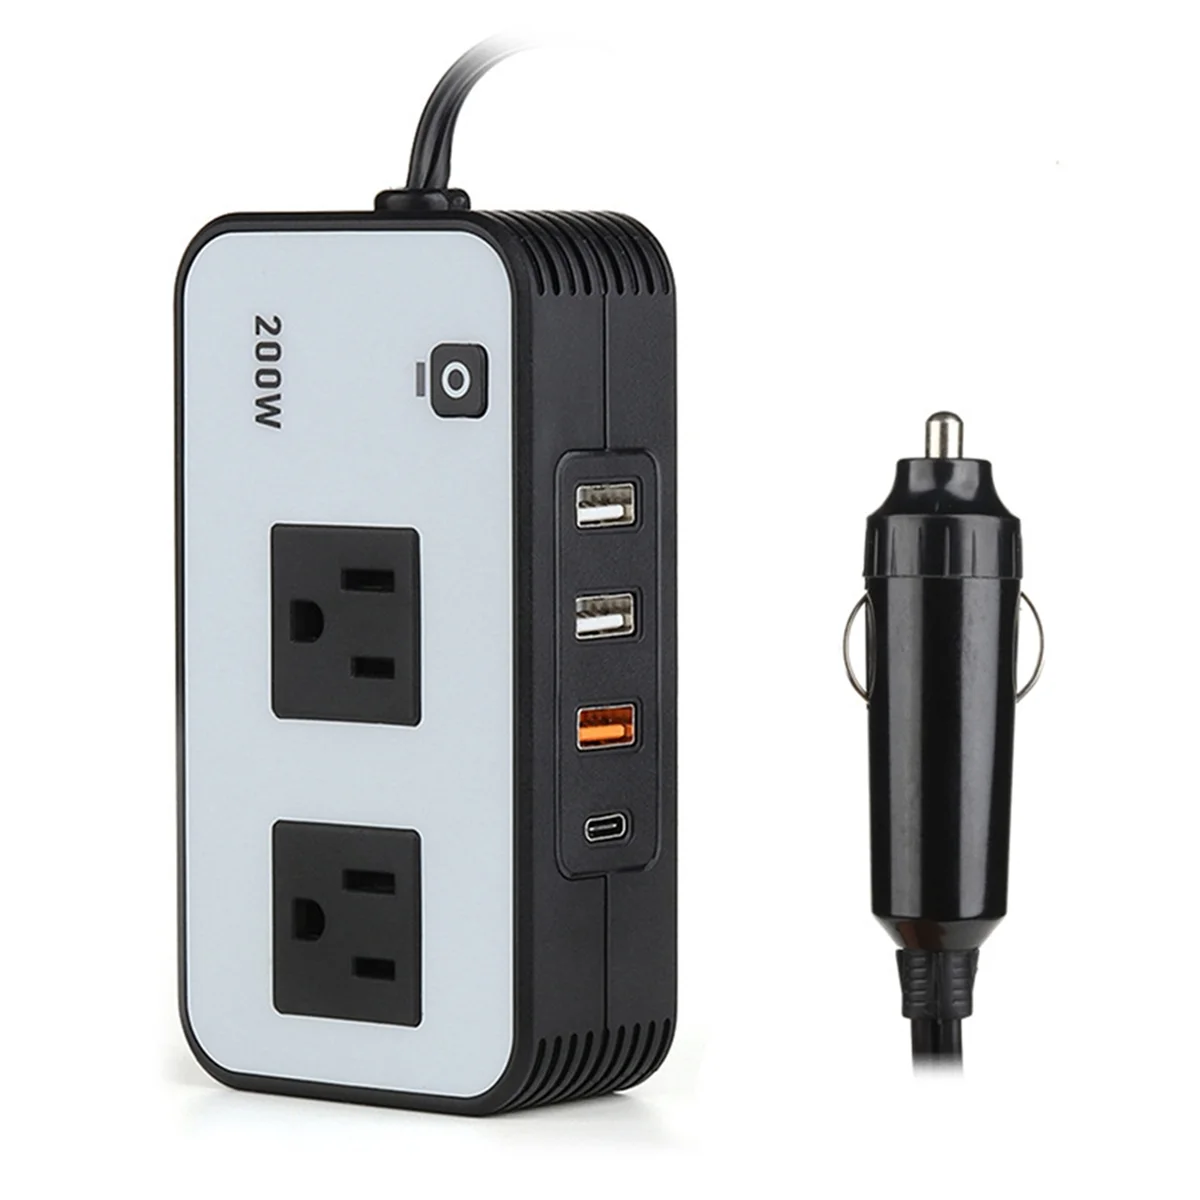 

200W Car Power Inverter, DC 12V to 110V AC Car Plug Adapter Socket with USB Fast Charger 2.4A USB/Laptop Car Charger